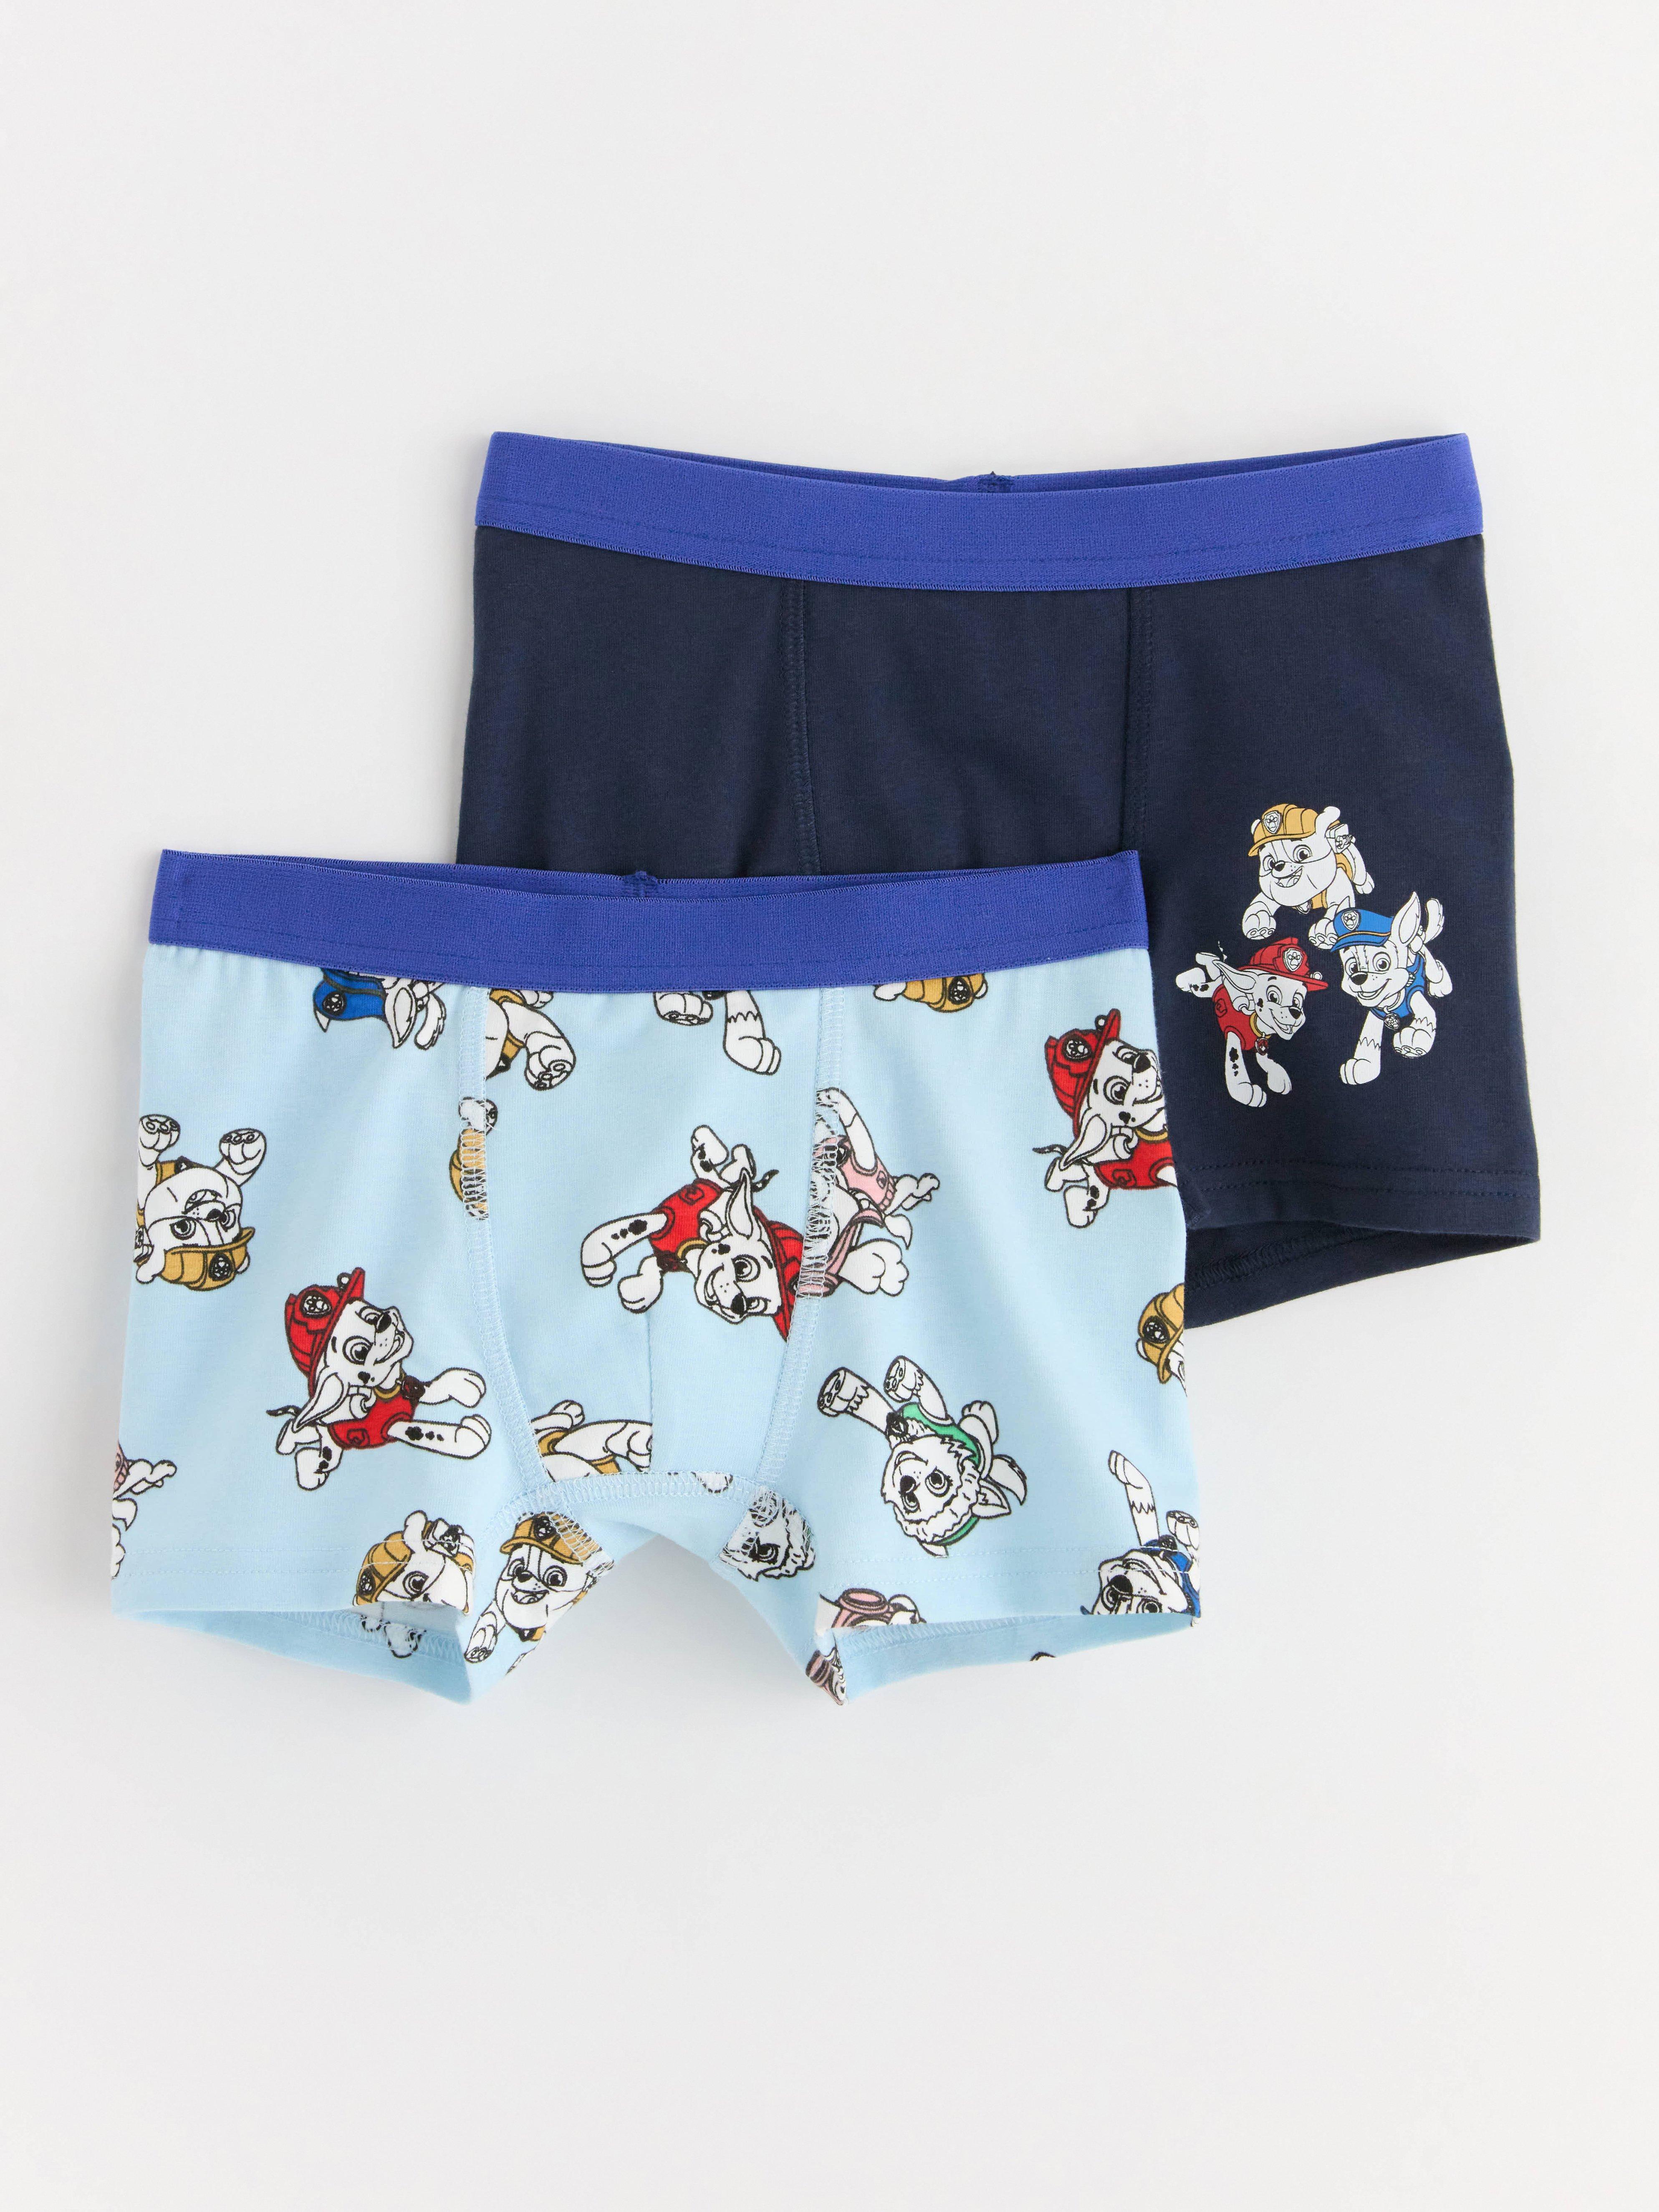 Paw Patrol Boy's pack of 4 breifs with elastique waist, Sizes 3 to